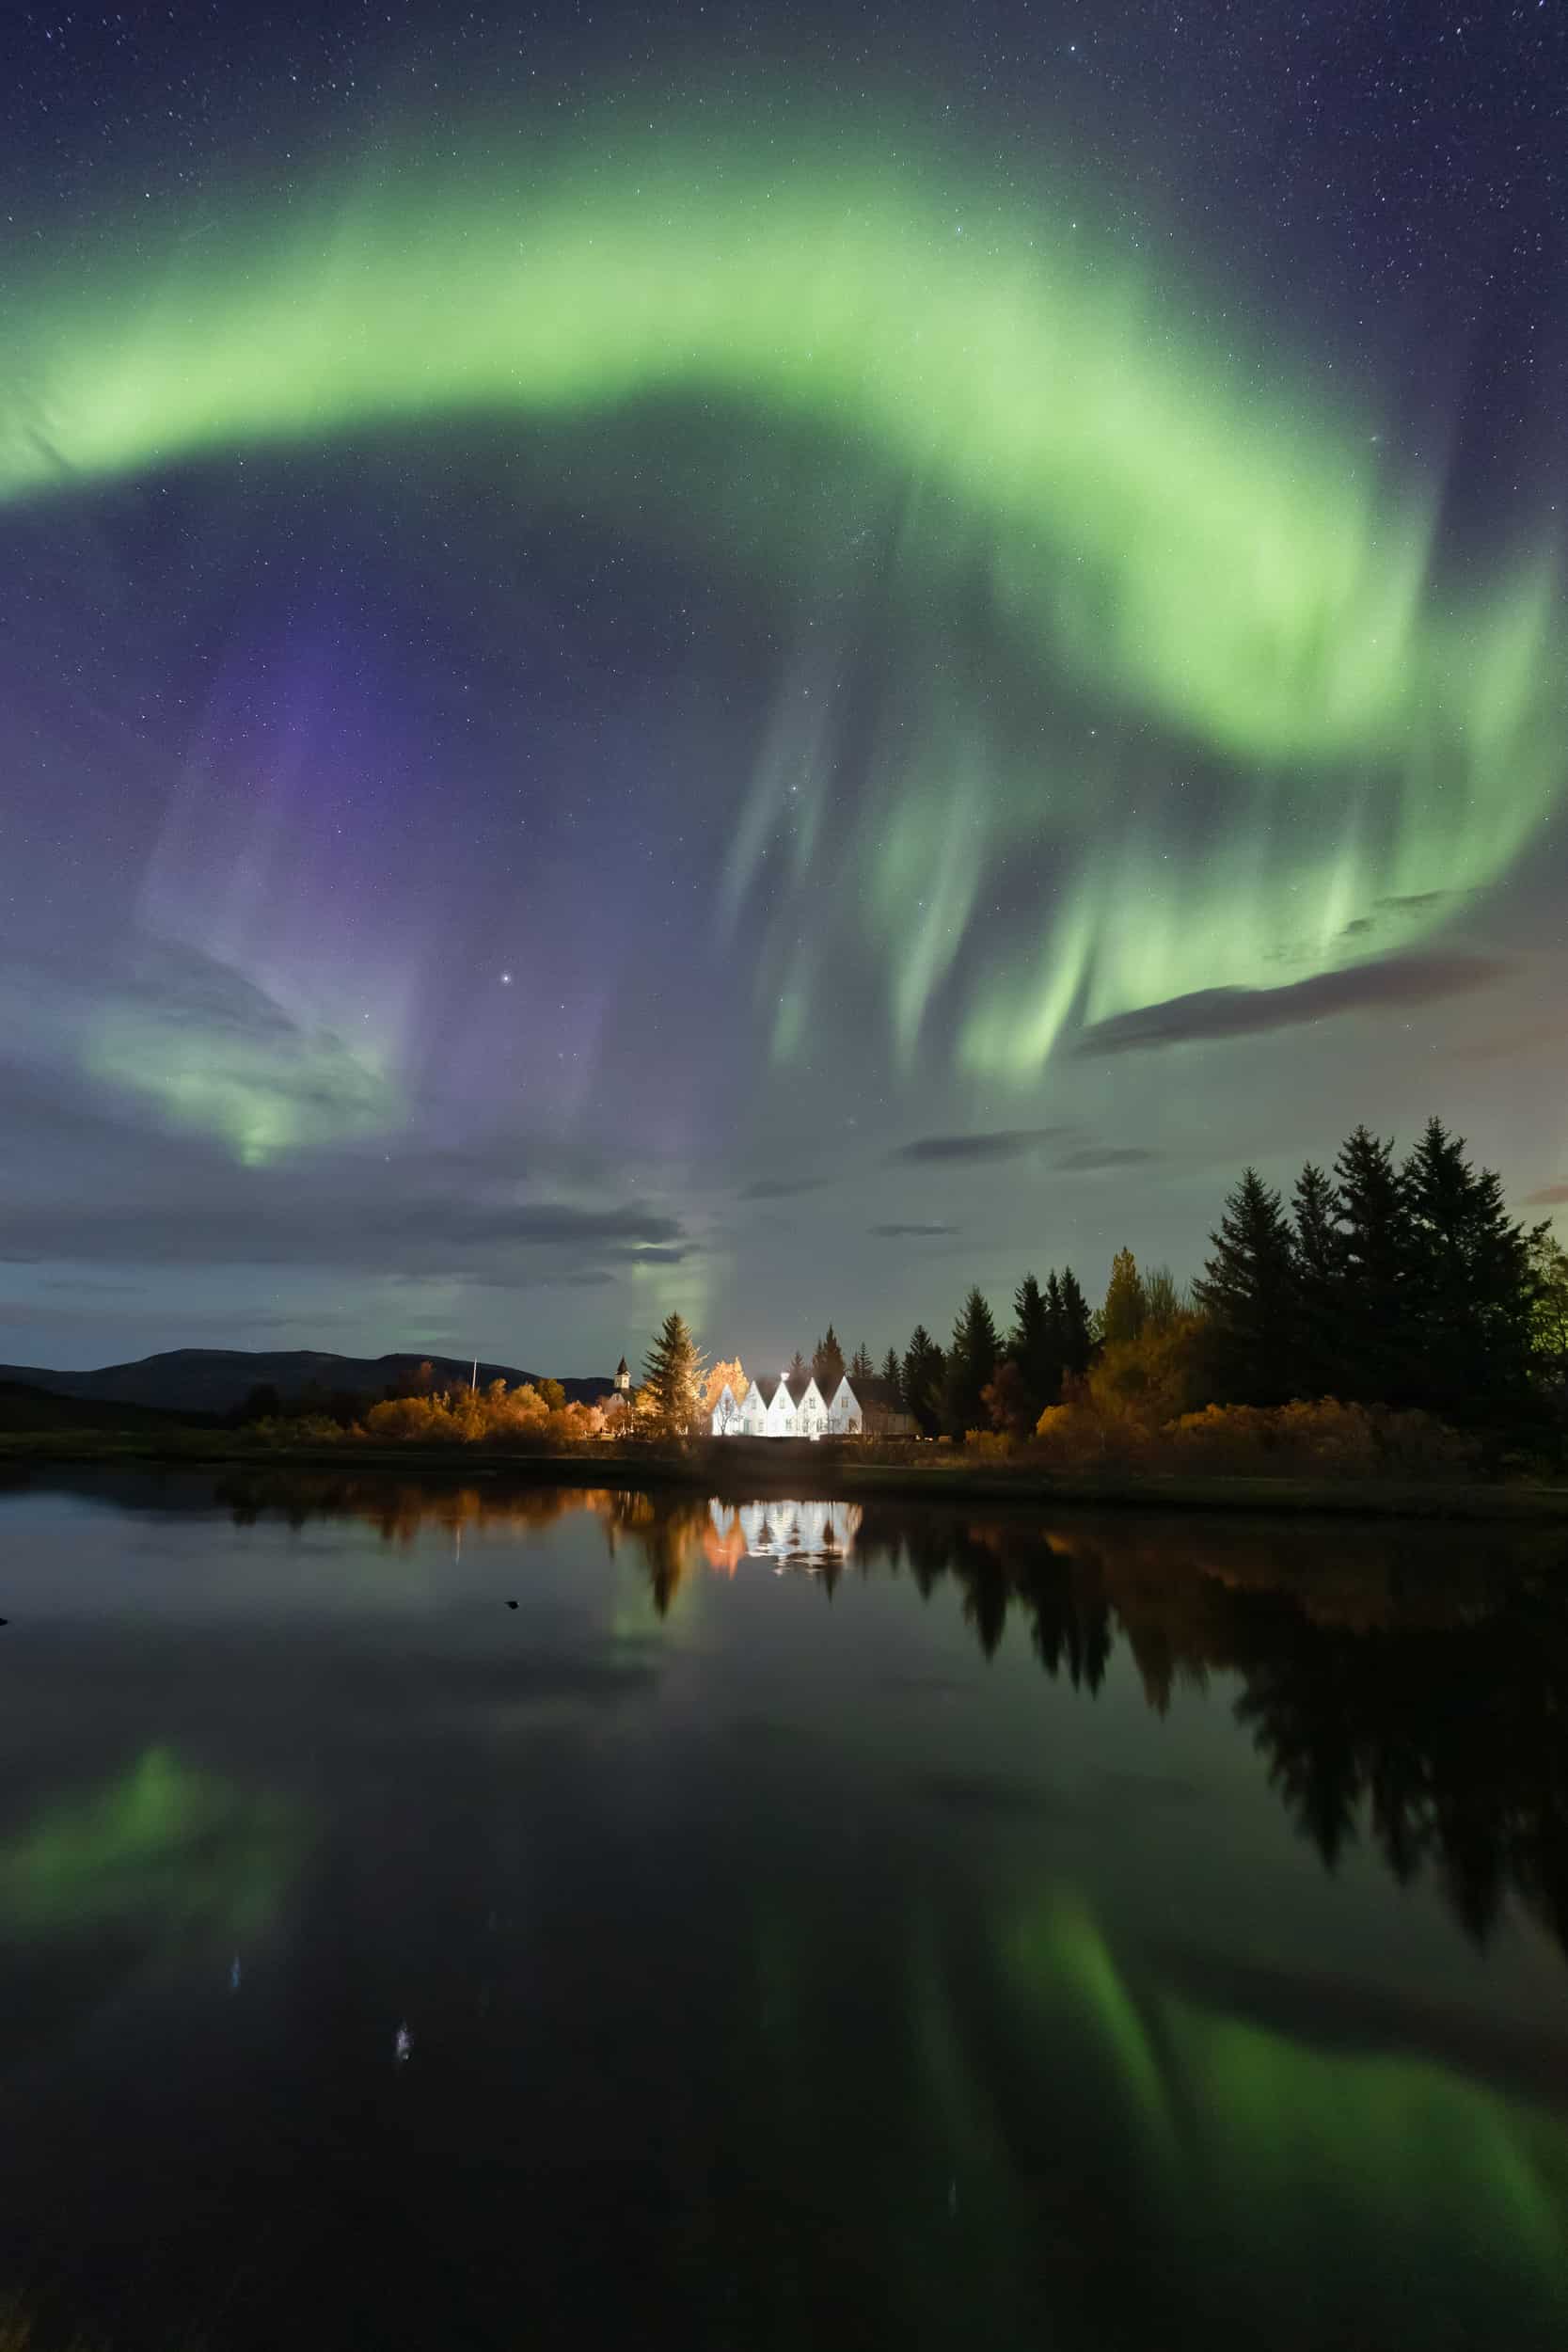 The artpiece 'Vatn' by Markus van Hauten shows a bright green and purple aurora over a lake and a small settlement on the lake edge.